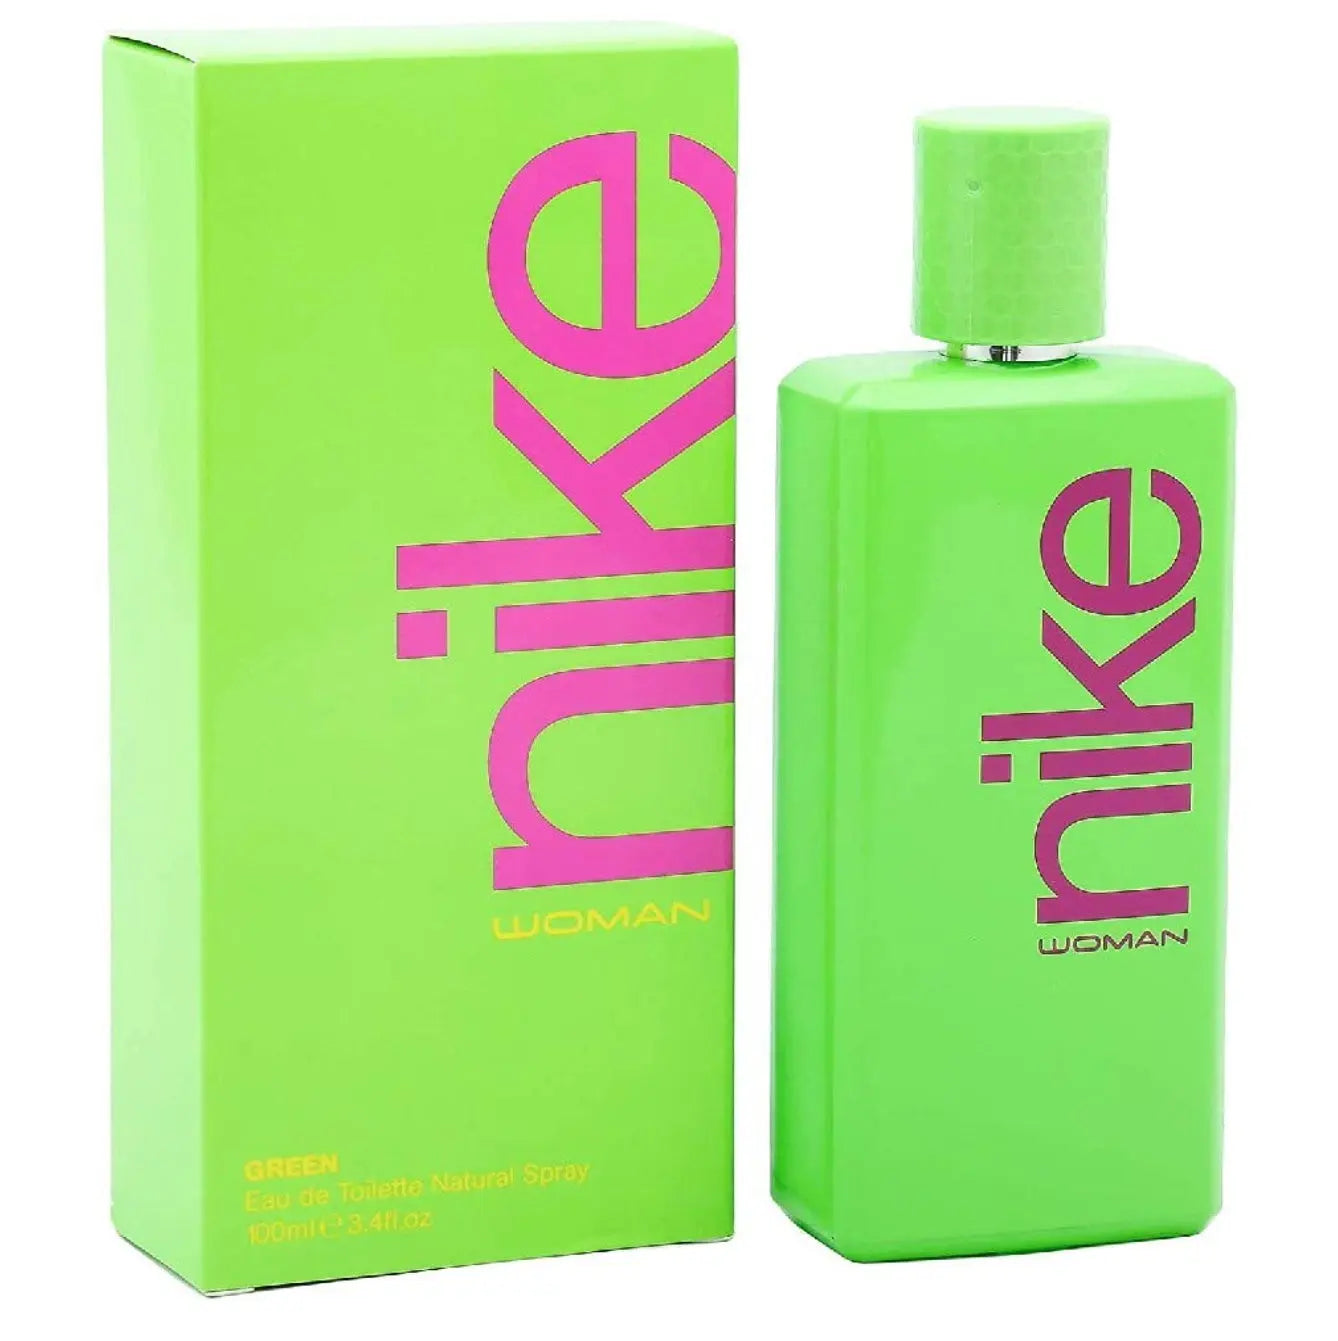 nike perfumes official site